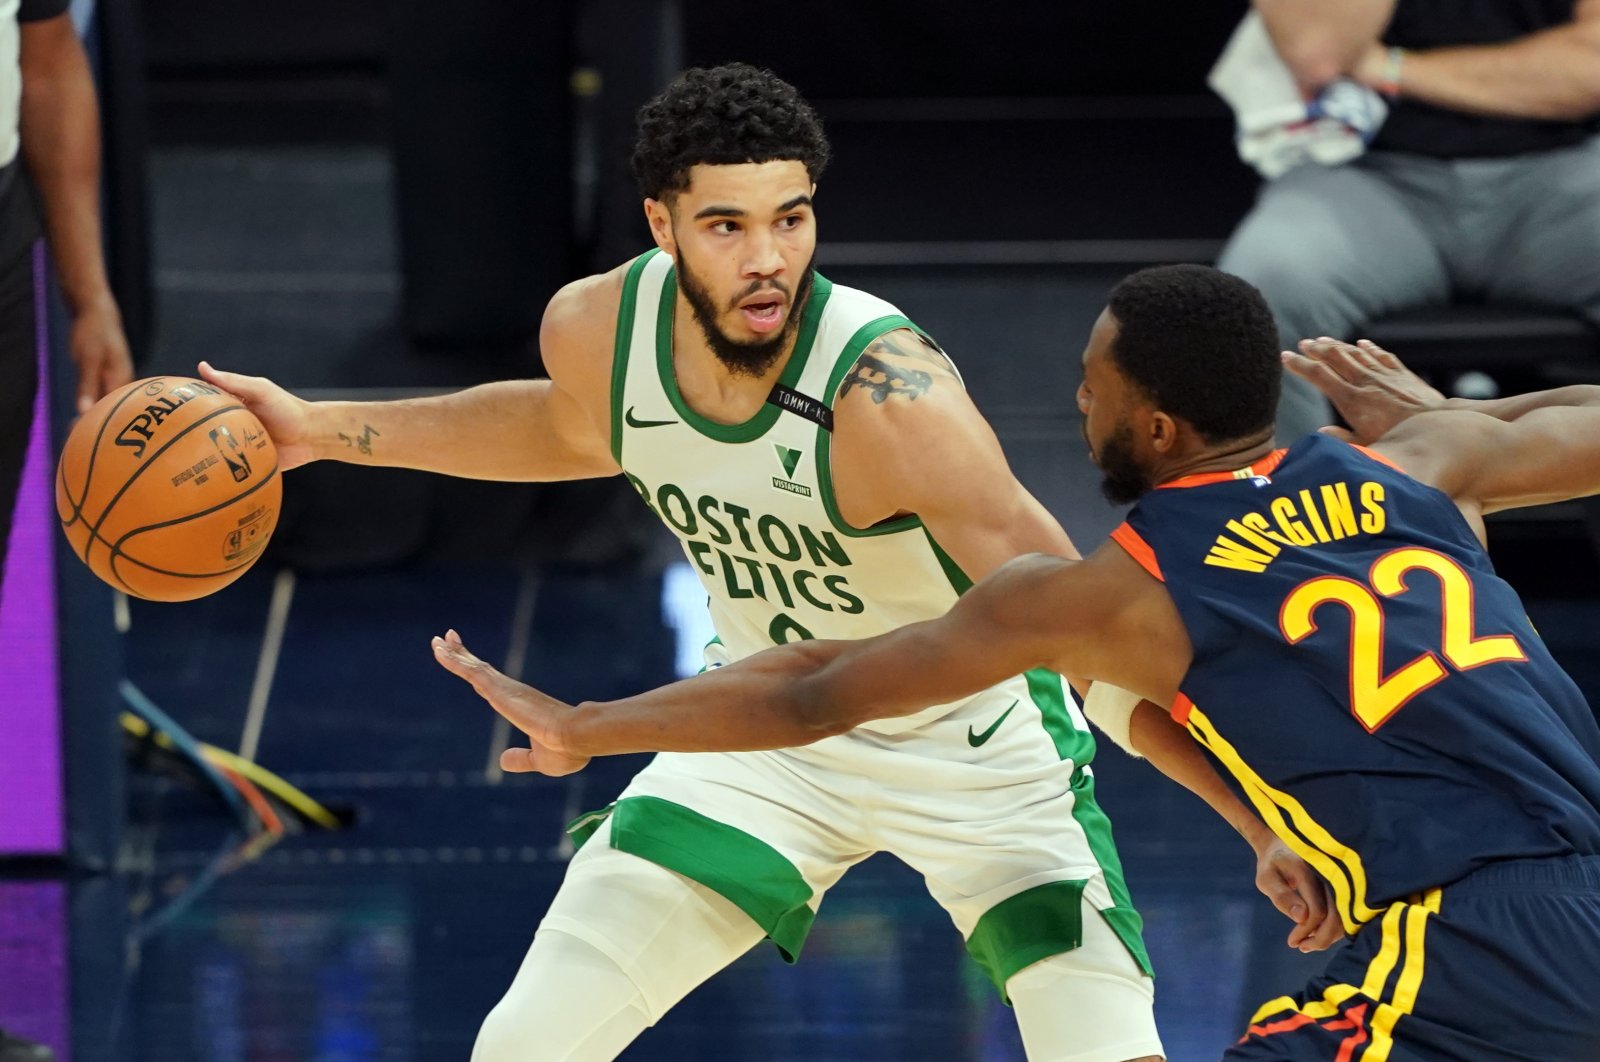 Boston Celtics forward Jayson Tatum (L) handles the ball while being defended by Golden State Warriors forward Andrew Wiggins (R) during the third quarter at Chase Center, San Francisco, California, U.S., Feb. 2, 2021. (Reuters Photo)